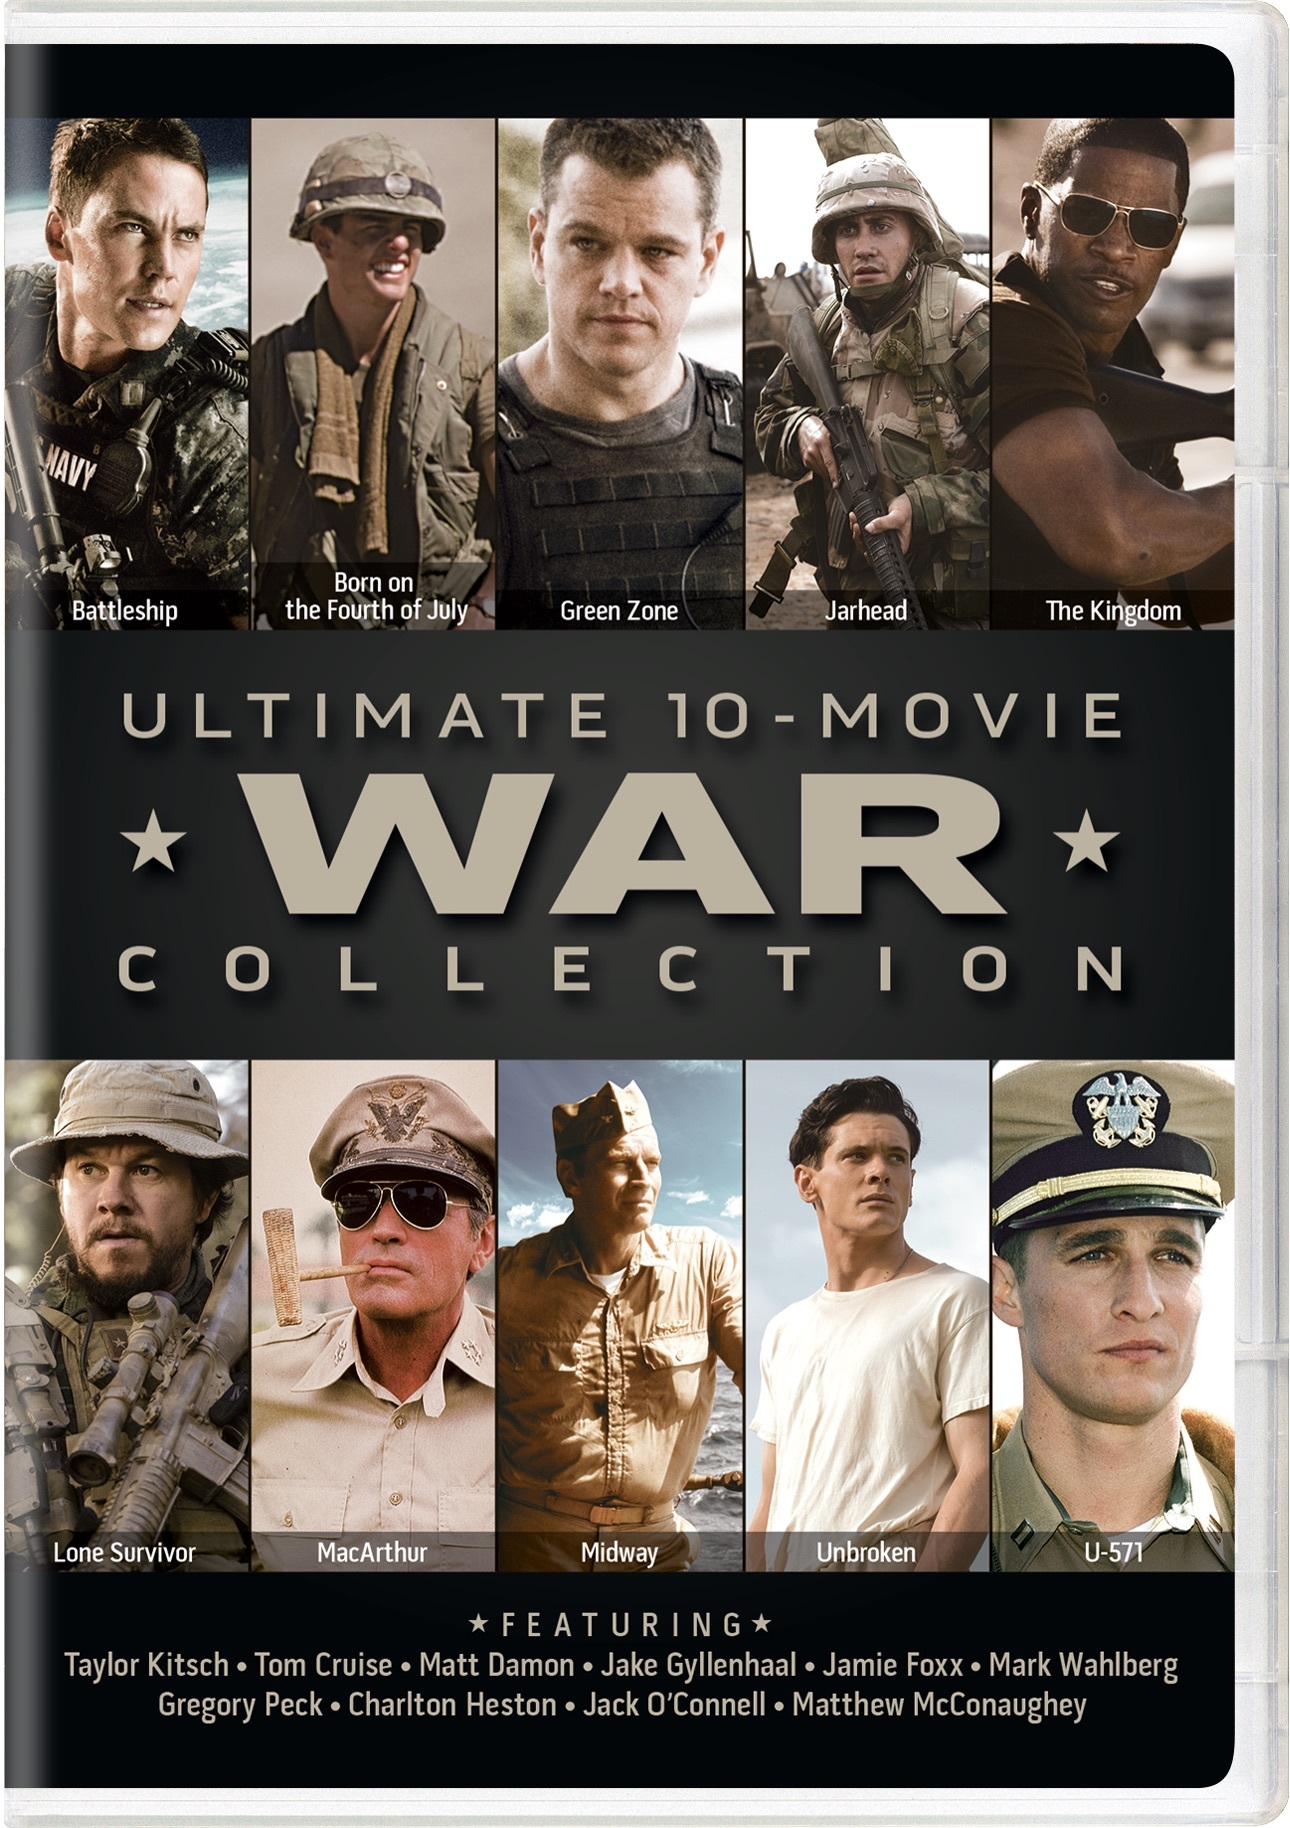 Ultimate 10-movie War Collection (Box Set) - DVD   - War Movies On DVD - Movies On GRUV